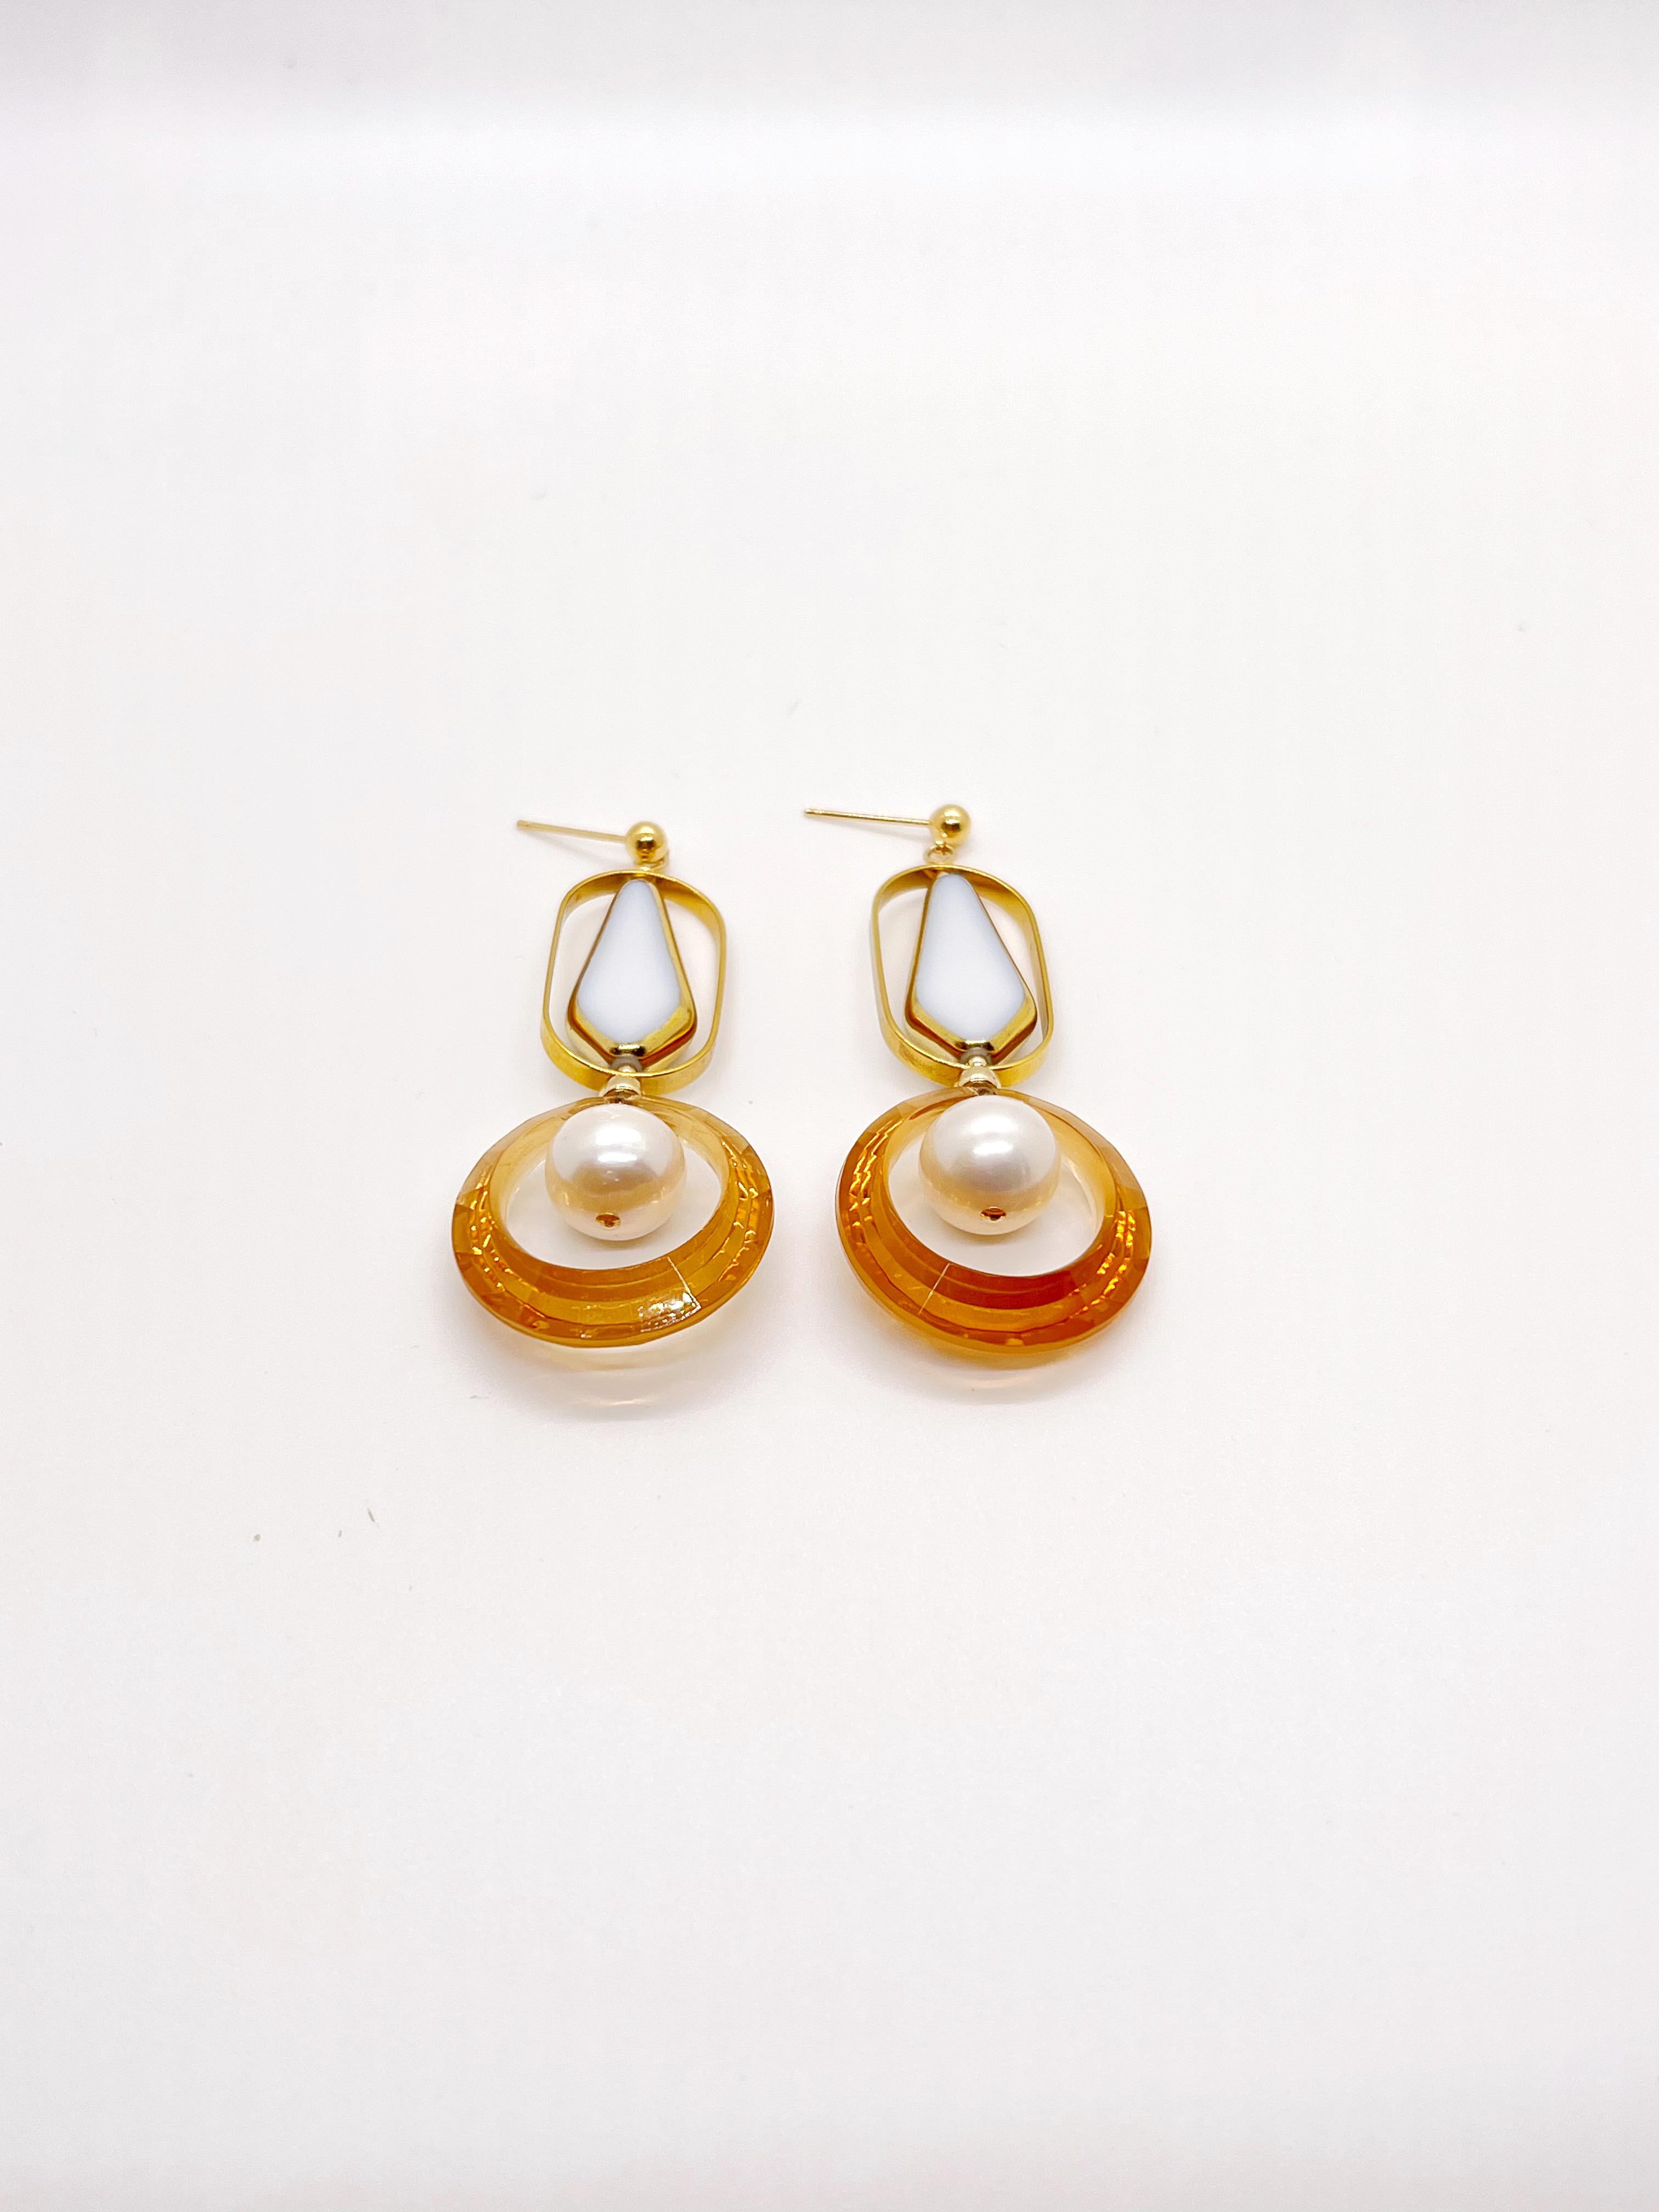 Each earring consist of white arrow vintage German glass beads edged with gold, brass metal plated with 24K gold,  caramel lucite round bead, freshwater pearls, gold-filled findings and ear stud.

The vintage German glass beads were hand pressed